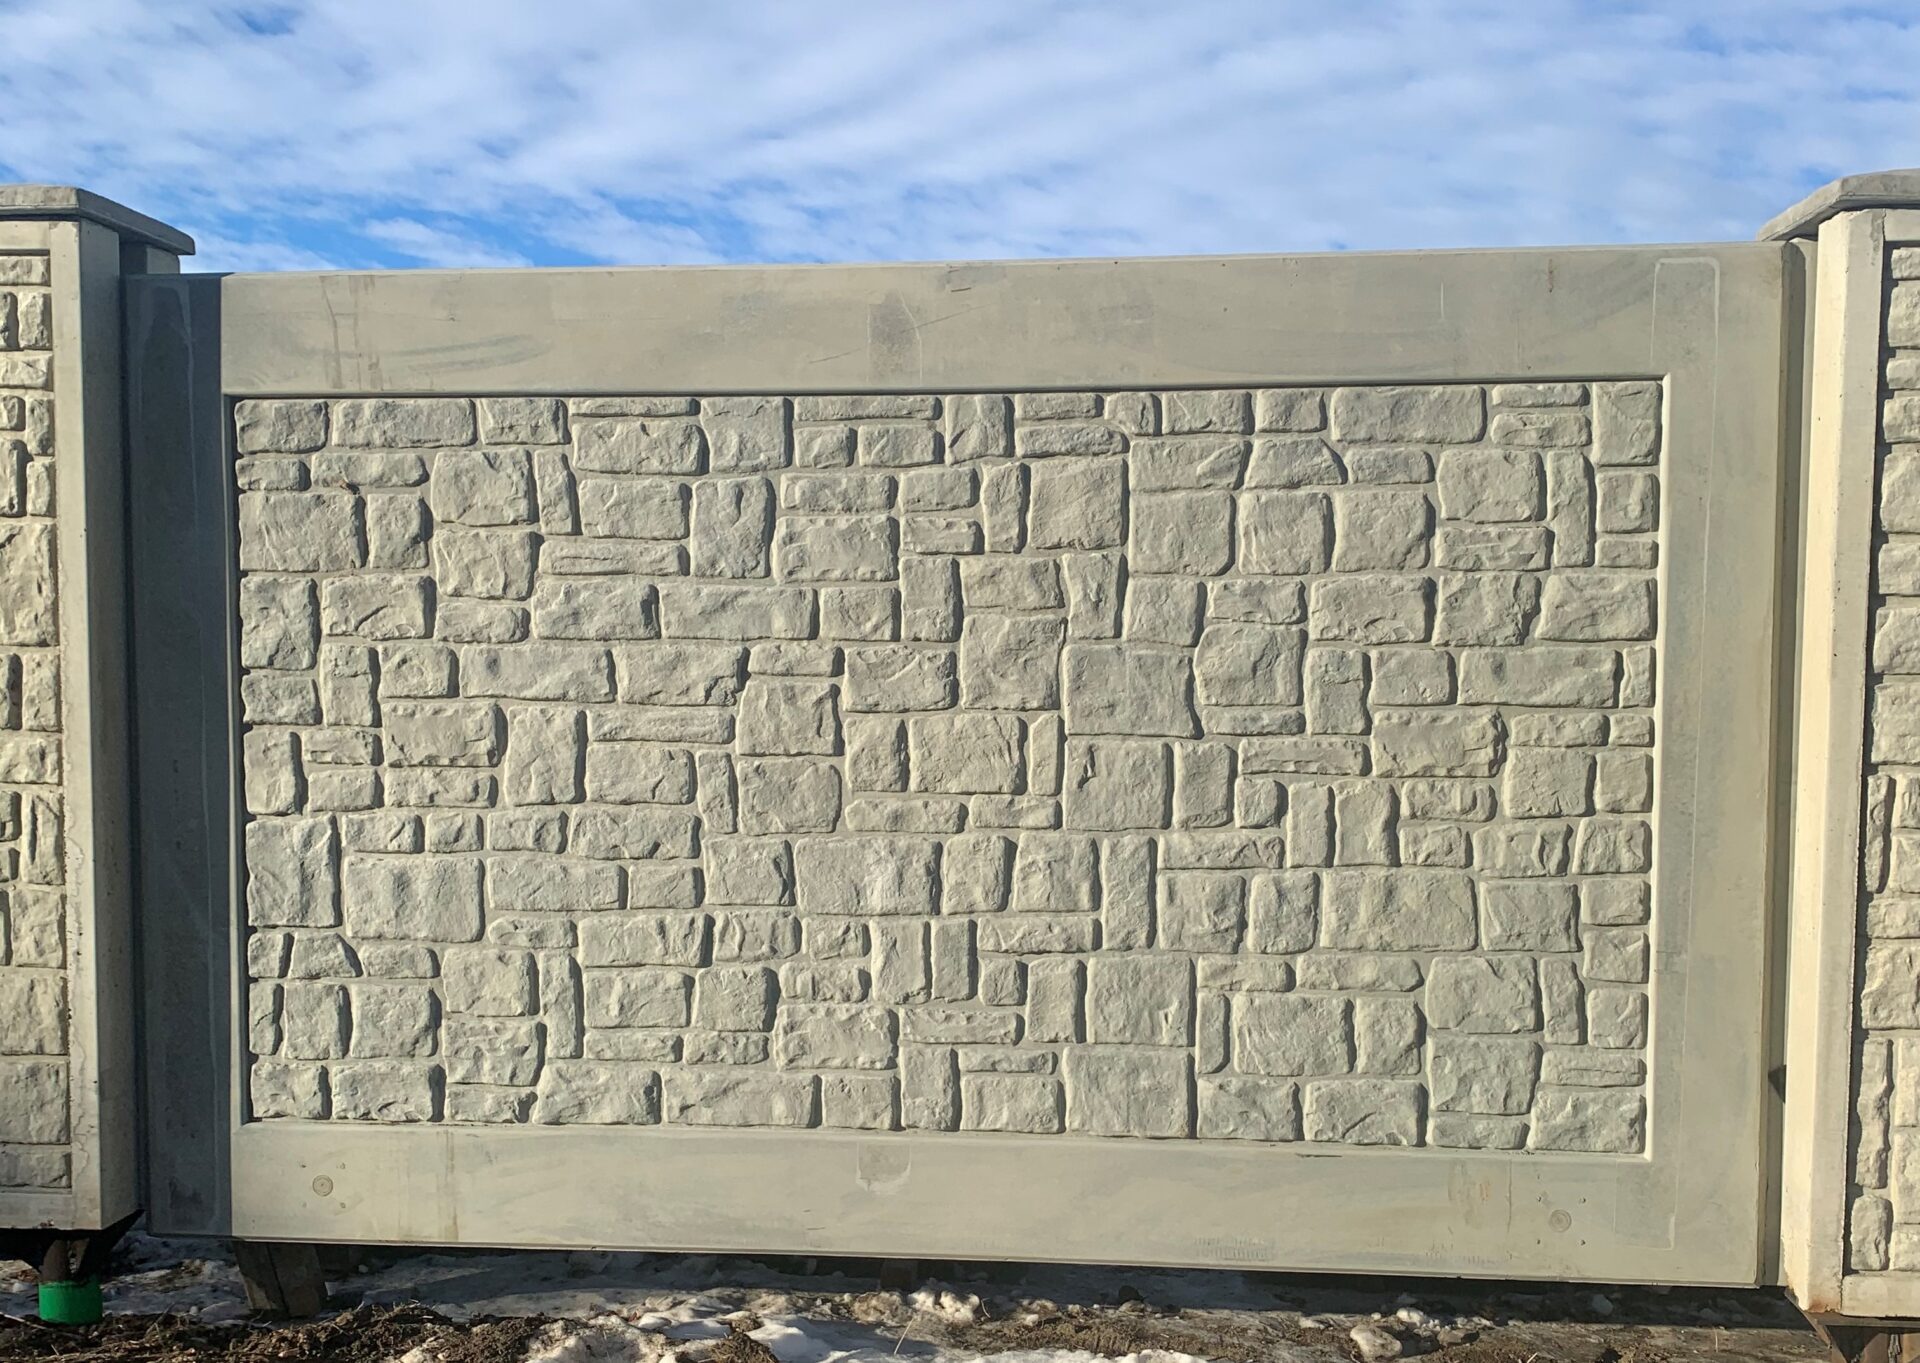 Sturdy and aesthetically pleasing precast concrete fence with intricate stone texture design, showcasing Westcon's quality craftsmanship in residential or commercial boundary solutions.